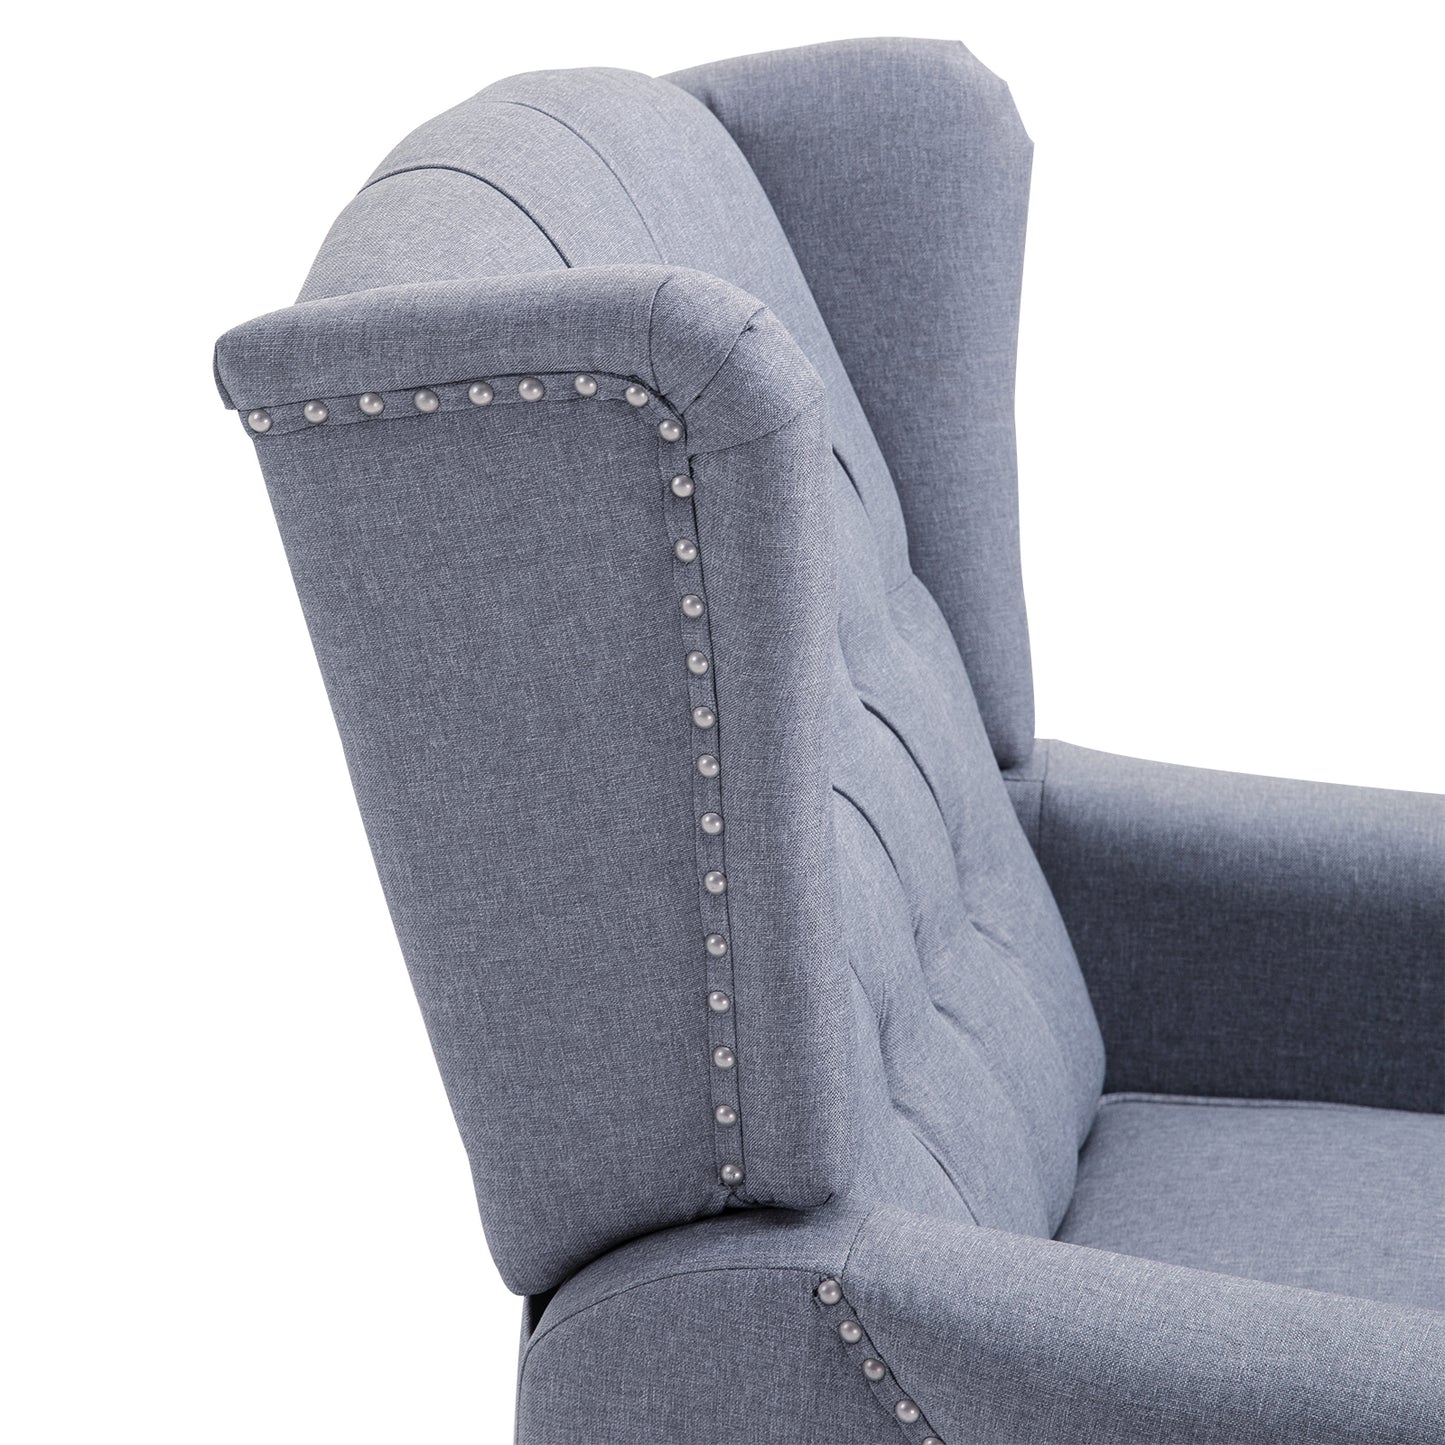 HOMCOM Recliner Armchair for Living Room, Reclining Chair, Wingback Chair with Button Tufted Back and Footrest, Light Grey